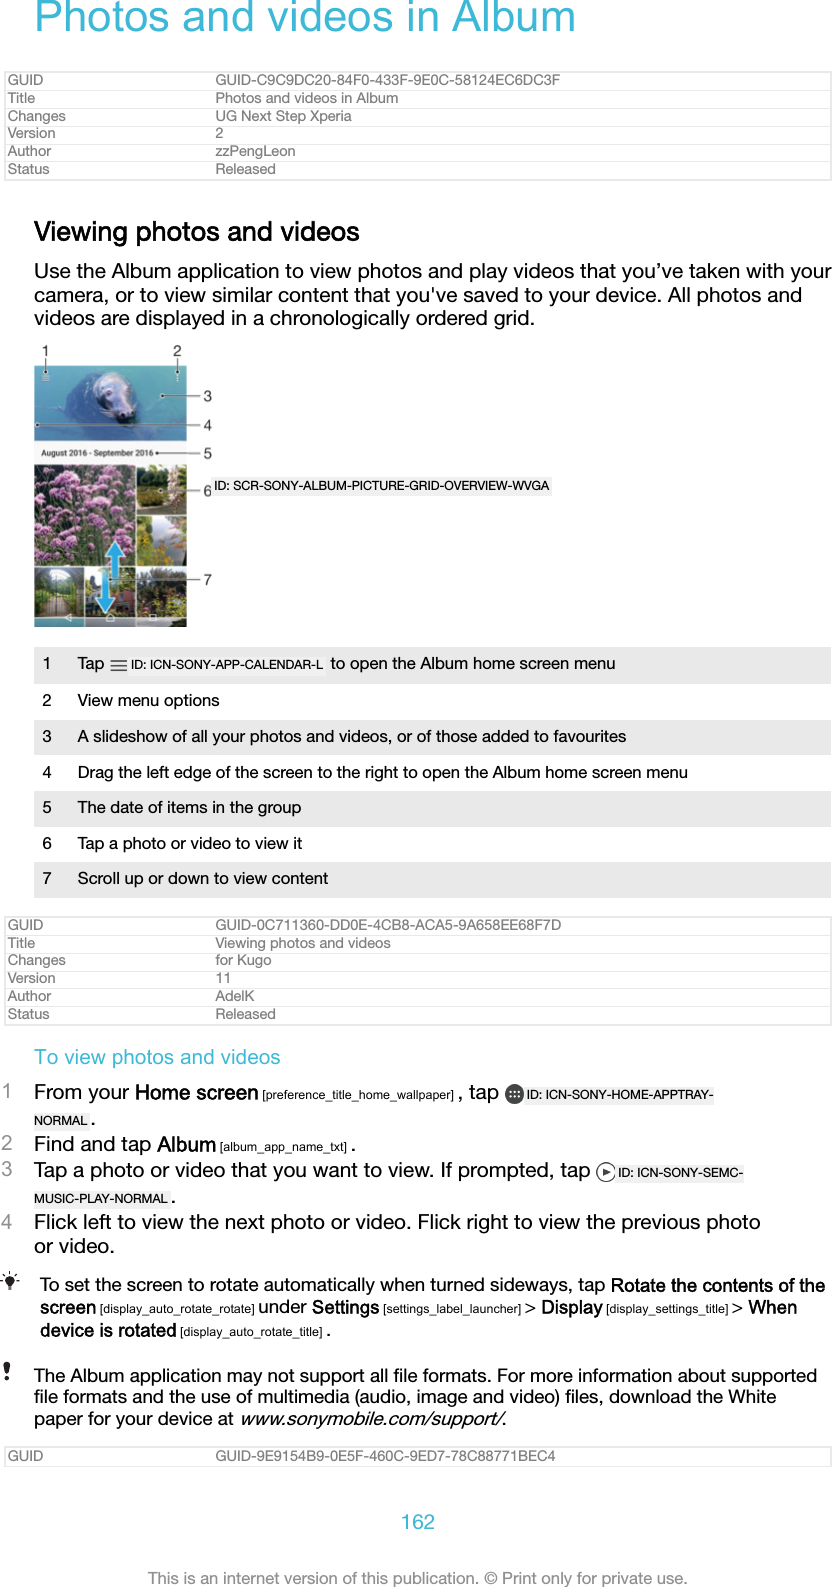 Photos and videos in AlbumGUID GUID-C9C9DC20-84F0-433F-9E0C-58124EC6DC3FTitle Photos and videos in AlbumChanges UG Next Step XperiaVersion 2Author zzPengLeonStatus ReleasedViewing photos and videosUse the Album application to view photos and play videos that you’ve taken with yourcamera, or to view similar content that you&apos;ve saved to your device. All photos andvideos are displayed in a chronologically ordered grid.ID: SCR-SONY-ALBUM-PICTURE-GRID-OVERVIEW-WVGA1Tap  ID: ICN-SONY-APP-CALENDAR-L  to open the Album home screen menu2 View menu options3 A slideshow of all your photos and videos, or of those added to favourites4 Drag the left edge of the screen to the right to open the Album home screen menu5 The date of items in the group6 Tap a photo or video to view it7 Scroll up or down to view contentGUID GUID-0C711360-DD0E-4CB8-ACA5-9A658EE68F7DTitle Viewing photos and videosChanges for KugoVersion 11Author AdelKStatus ReleasedTo view photos and videos1From your Home screen [preference_title_home_wallpaper] , tap  ID: ICN-SONY-HOME-APPTRAY-NORMAL .2Find and tap Album [album_app_name_txt] .3Tap a photo or video that you want to view. If prompted, tap  ID: ICN-SONY-SEMC-MUSIC-PLAY-NORMAL .4Flick left to view the next photo or video. Flick right to view the previous photoor video.To set the screen to rotate automatically when turned sideways, tap Rotate the contents of thescreen [display_auto_rotate_rotate] under Settings [settings_label_launcher] &gt; Display [display_settings_title] &gt; Whendevice is rotated [display_auto_rotate_title] .The Album application may not support all ﬁle formats. For more information about supportedﬁle formats and the use of multimedia (audio, image and video) ﬁles, download the Whitepaper for your device at www.sonymobile.com/support/.GUID GUID-9E9154B9-0E5F-460C-9ED7-78C88771BEC4162This is an internet version of this publication. © Print only for private use.